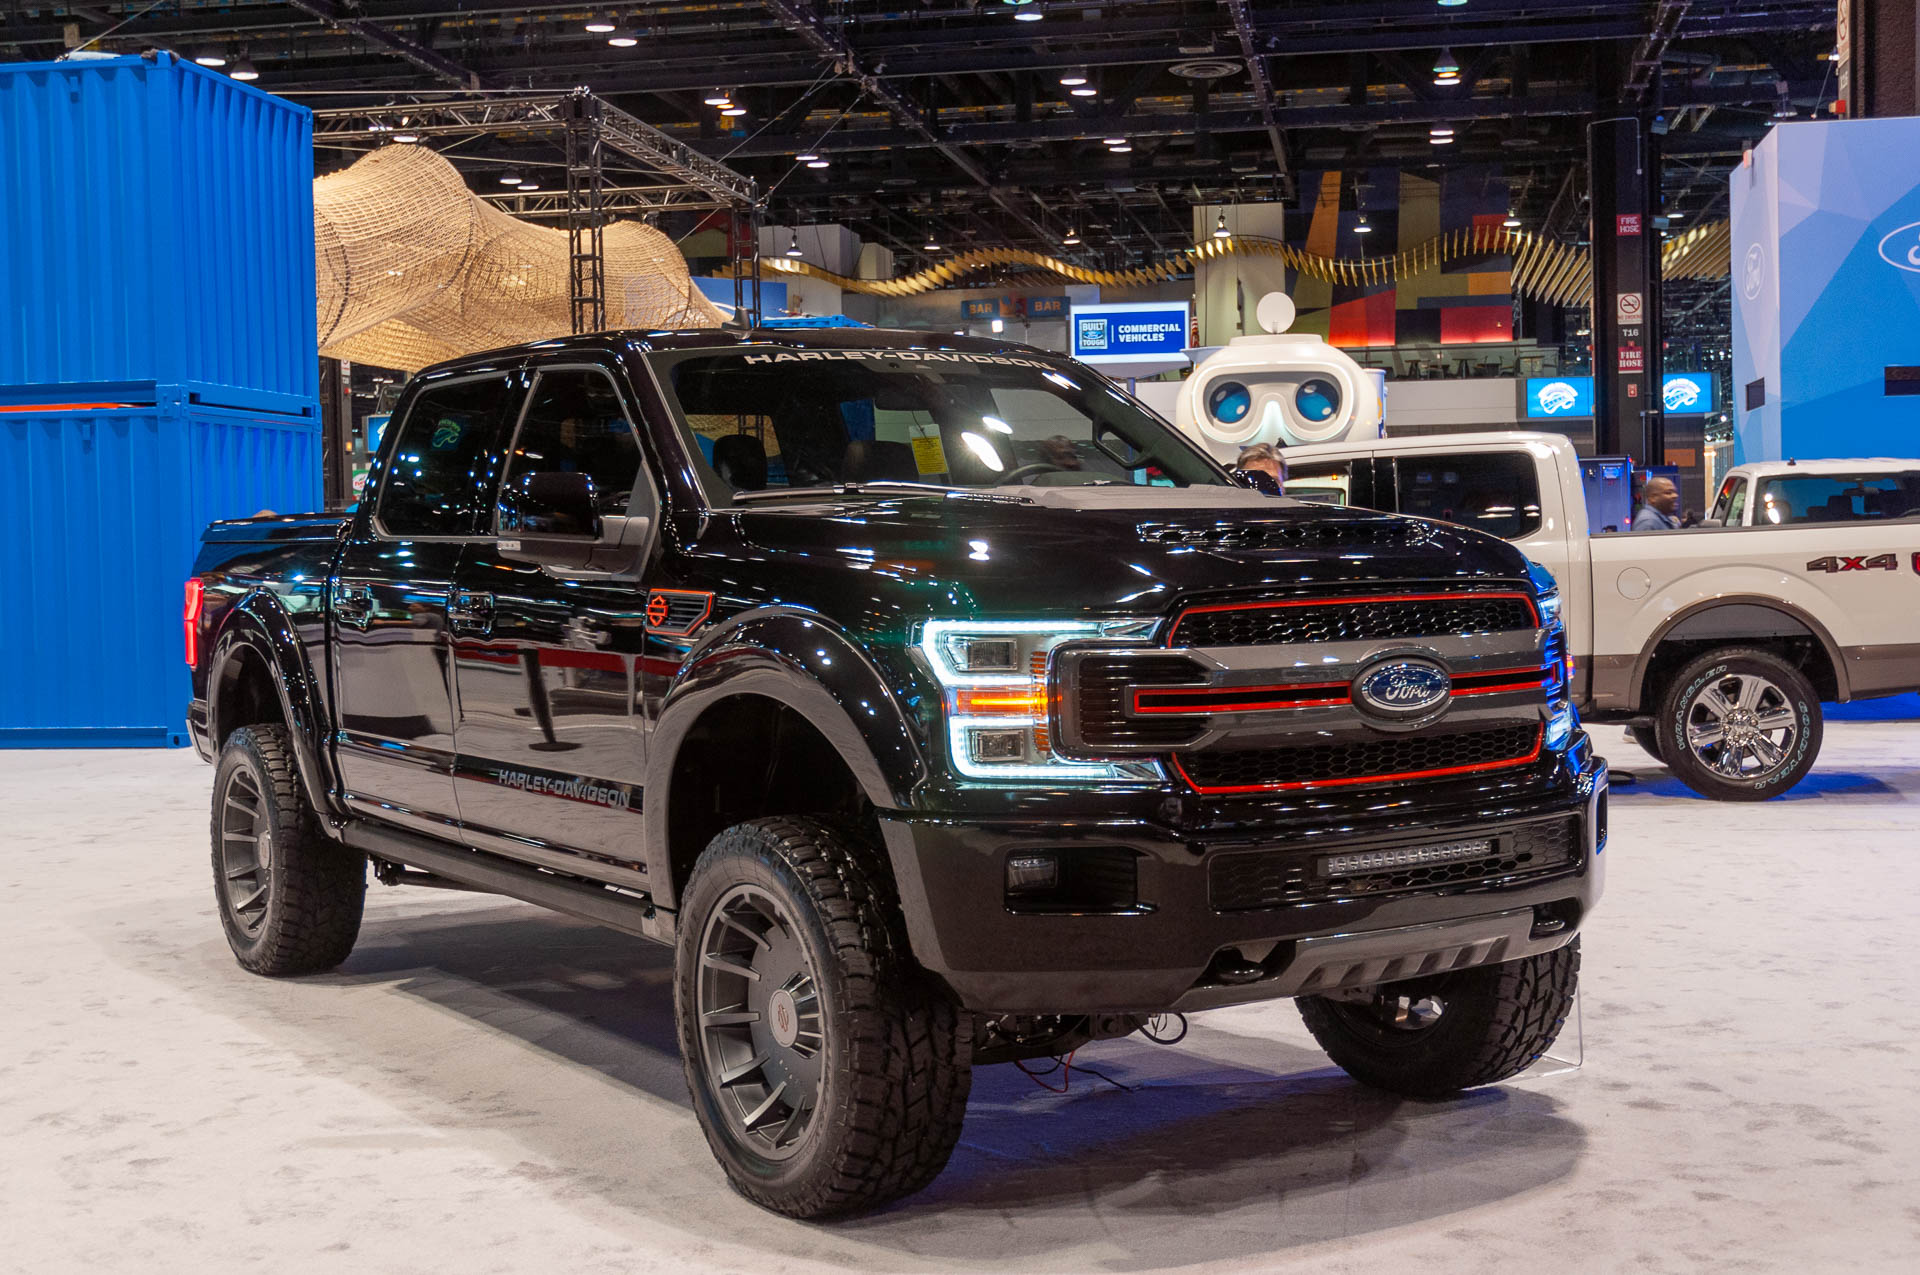 2020 Ford F 150 Harley Davidson Arrives With 700 Plus Supercharged